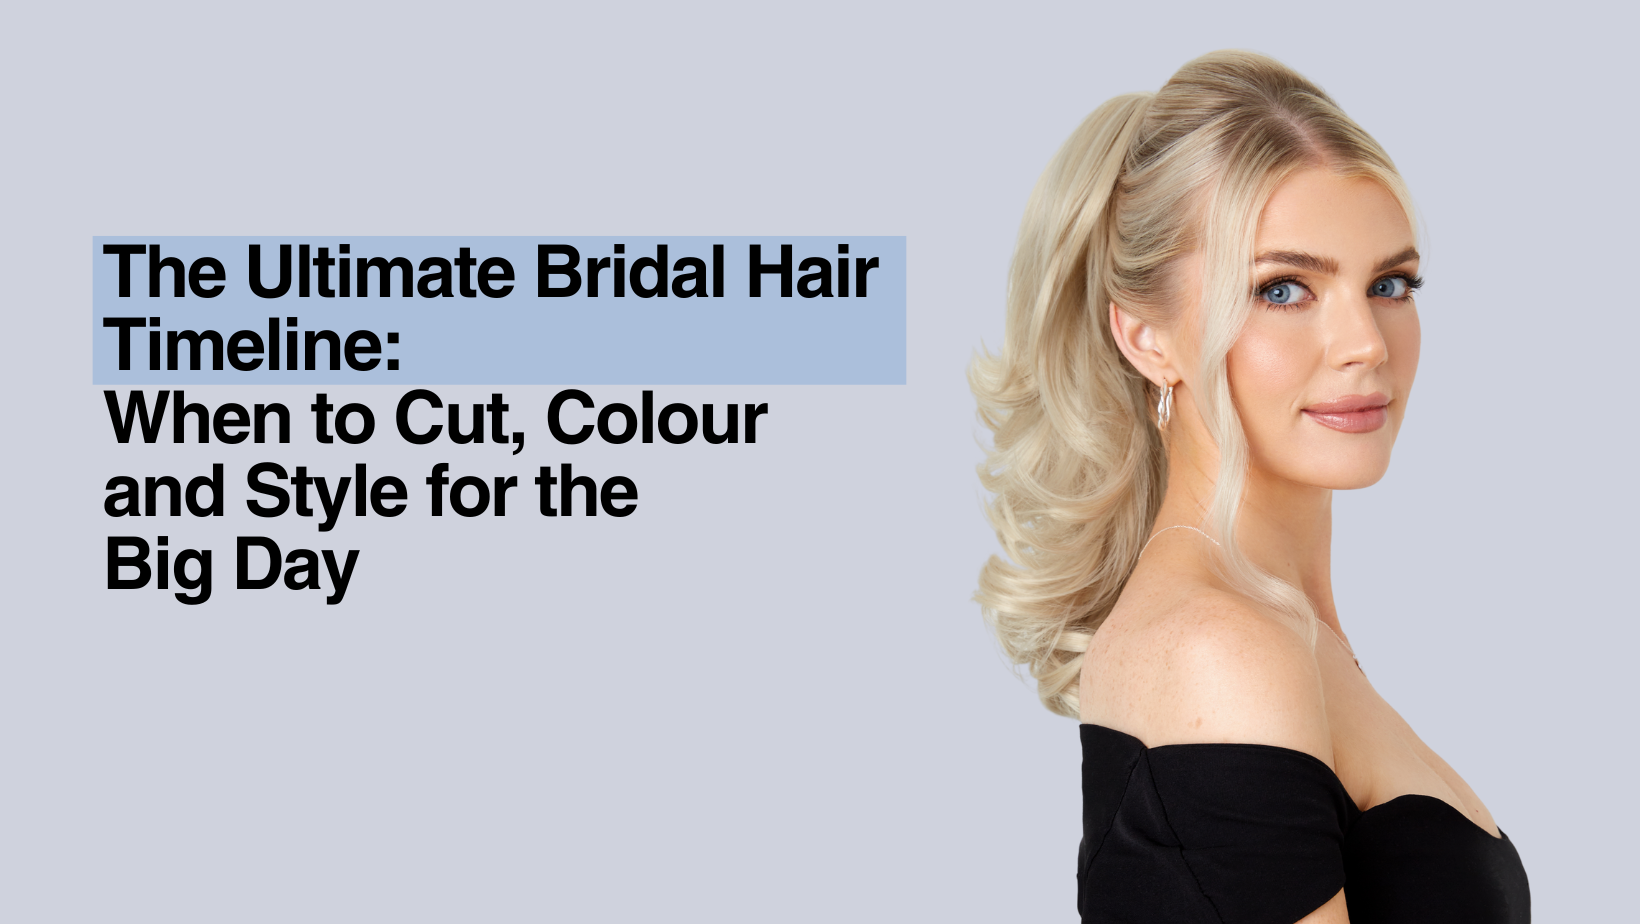 The Ultimate bridal Hair timeline: When to Cut, Colour and Style for the Big Day